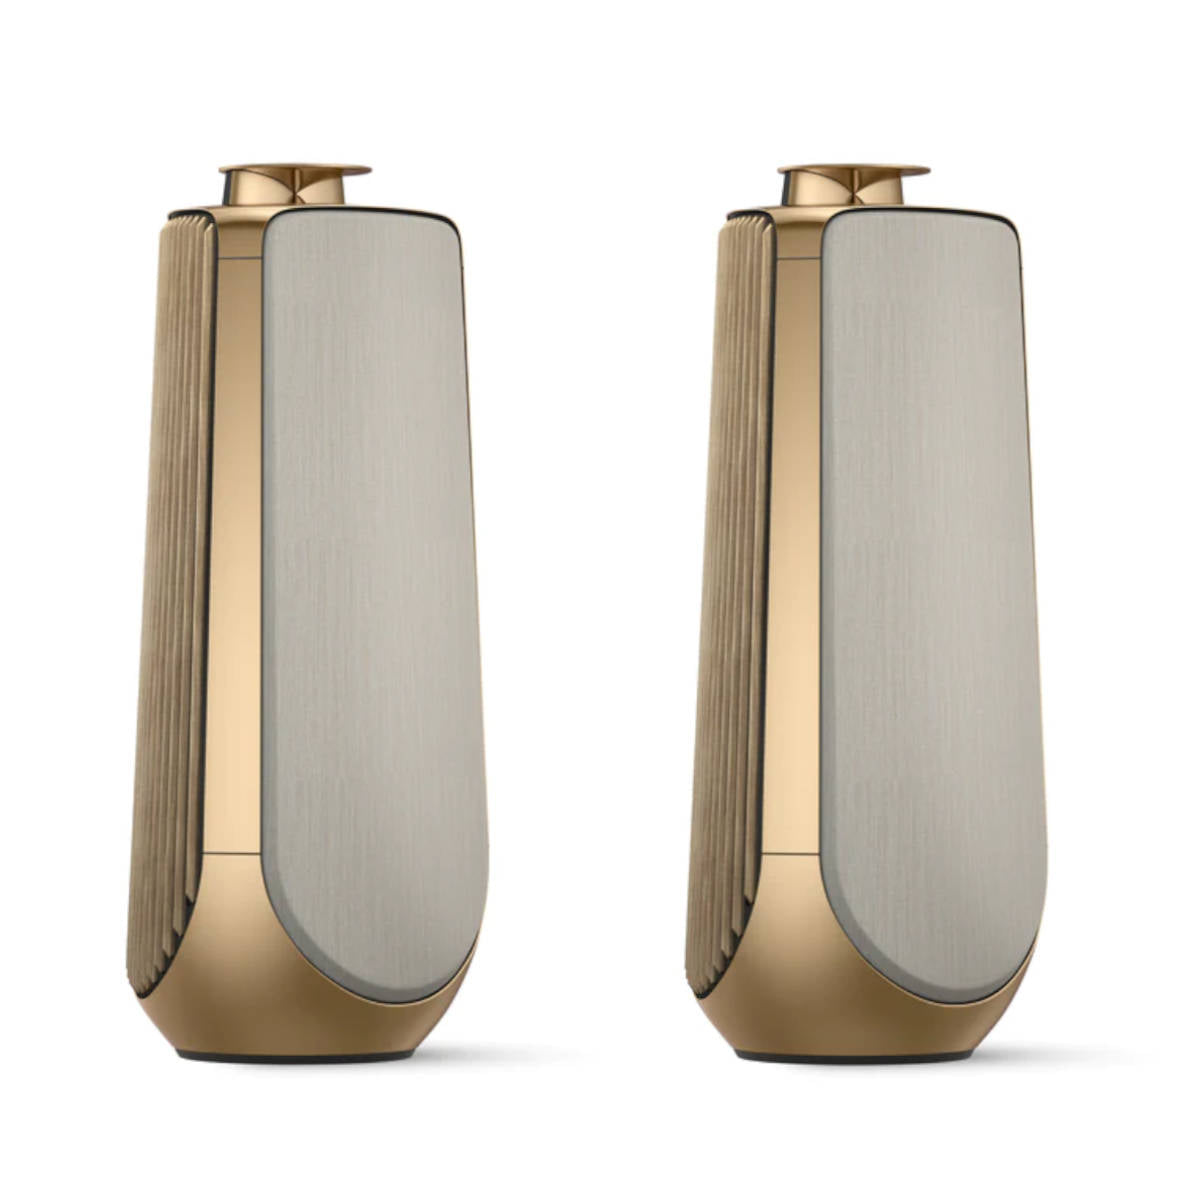 Bang & Olufsen Beosound Explore Online at Lowest Price in India